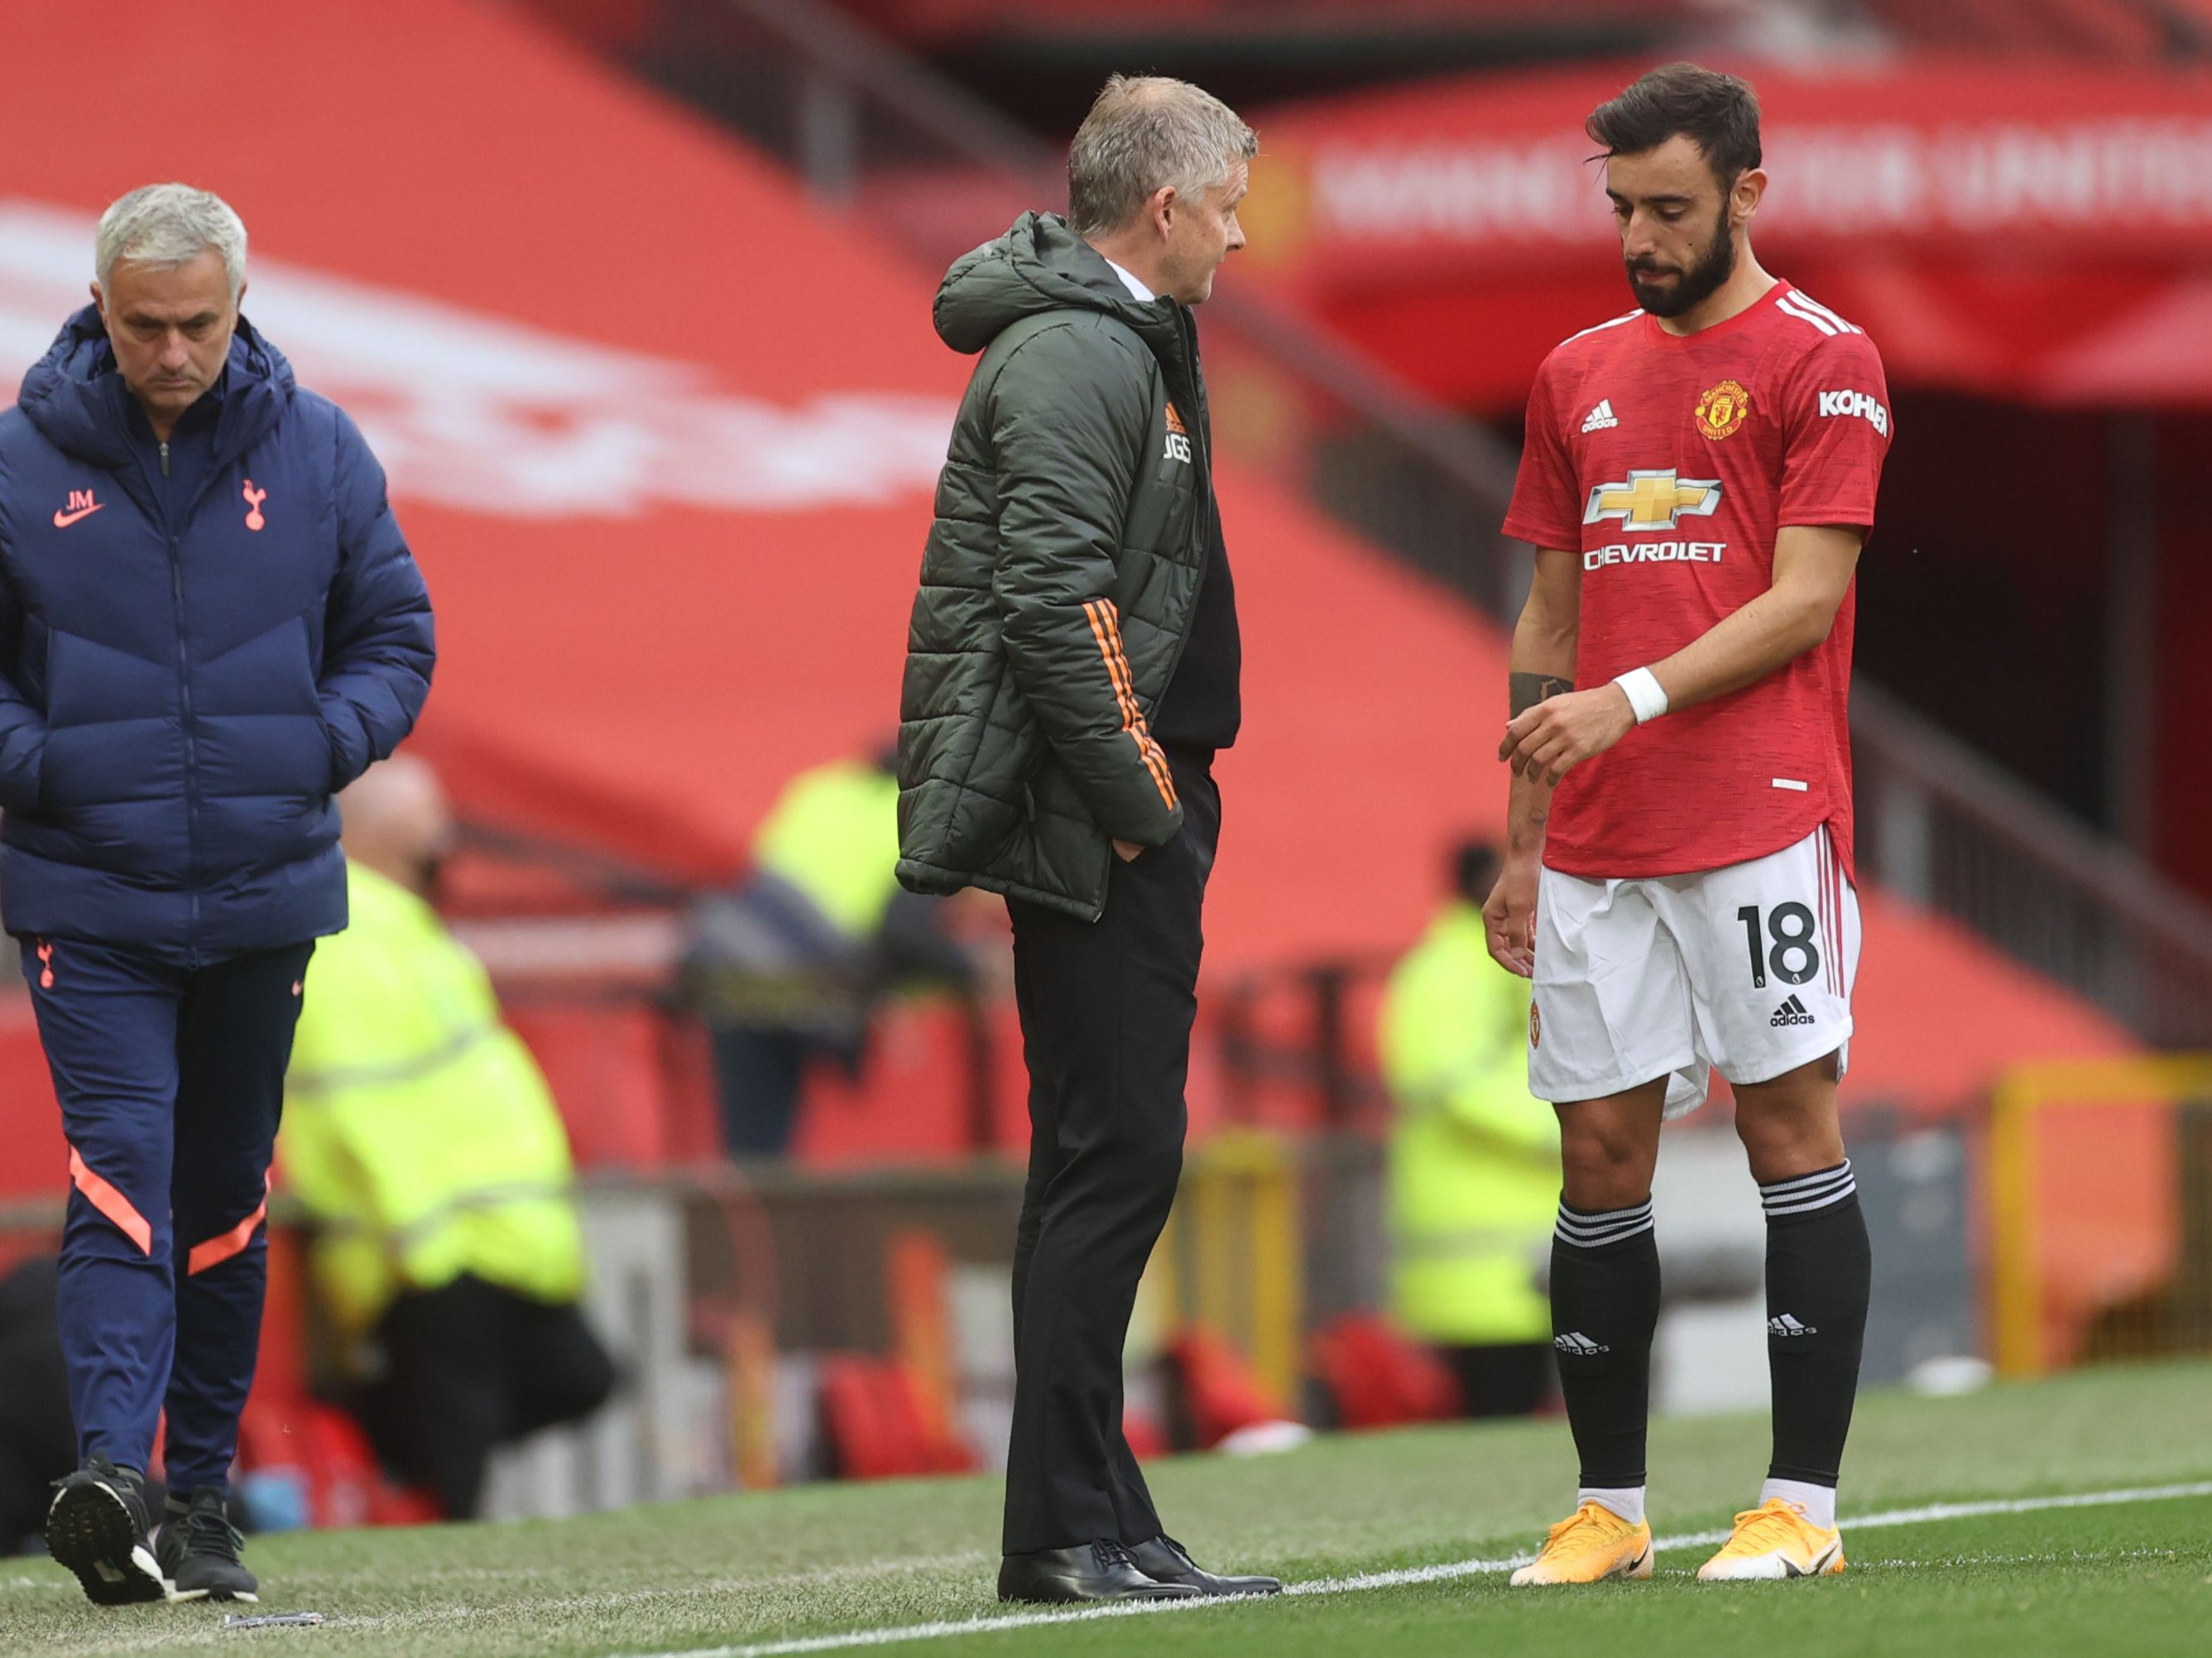 Bruno Fernandes has denied reports of a rift with Manchester United boss Ole Gunnar Solskjaer